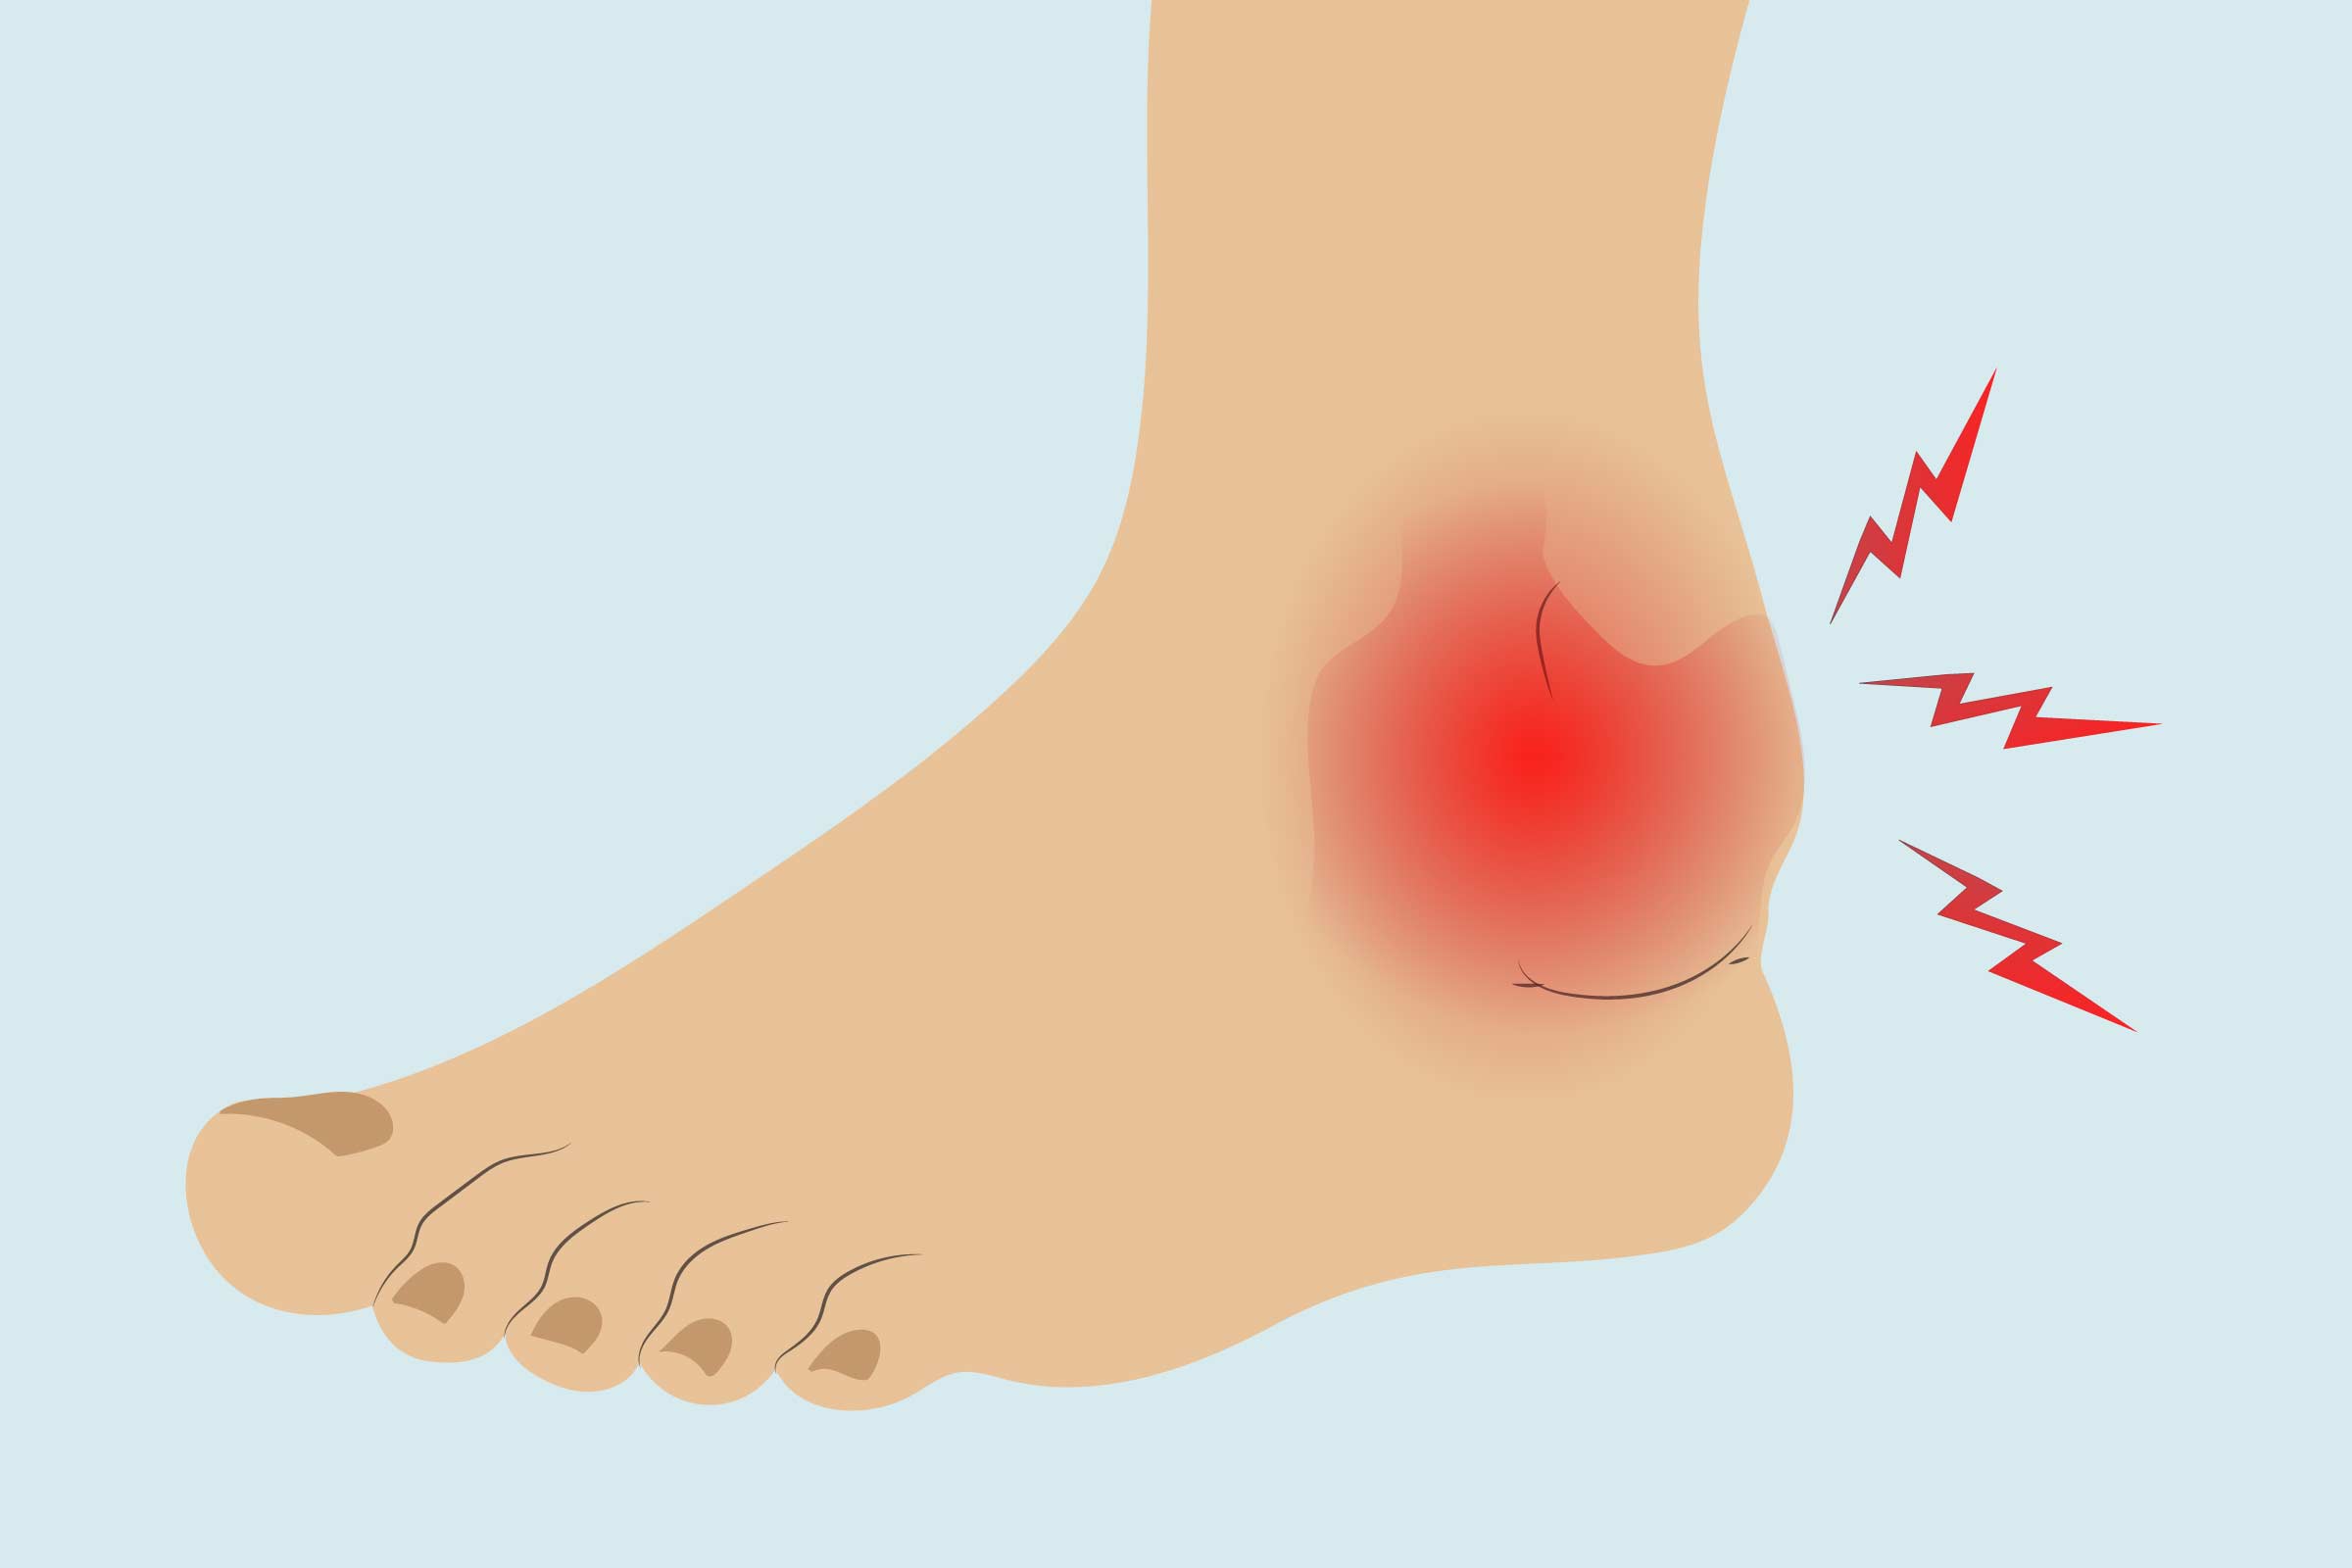 Ankle Pain Shooting Up Leg: Causes, Treatment, and Recovery